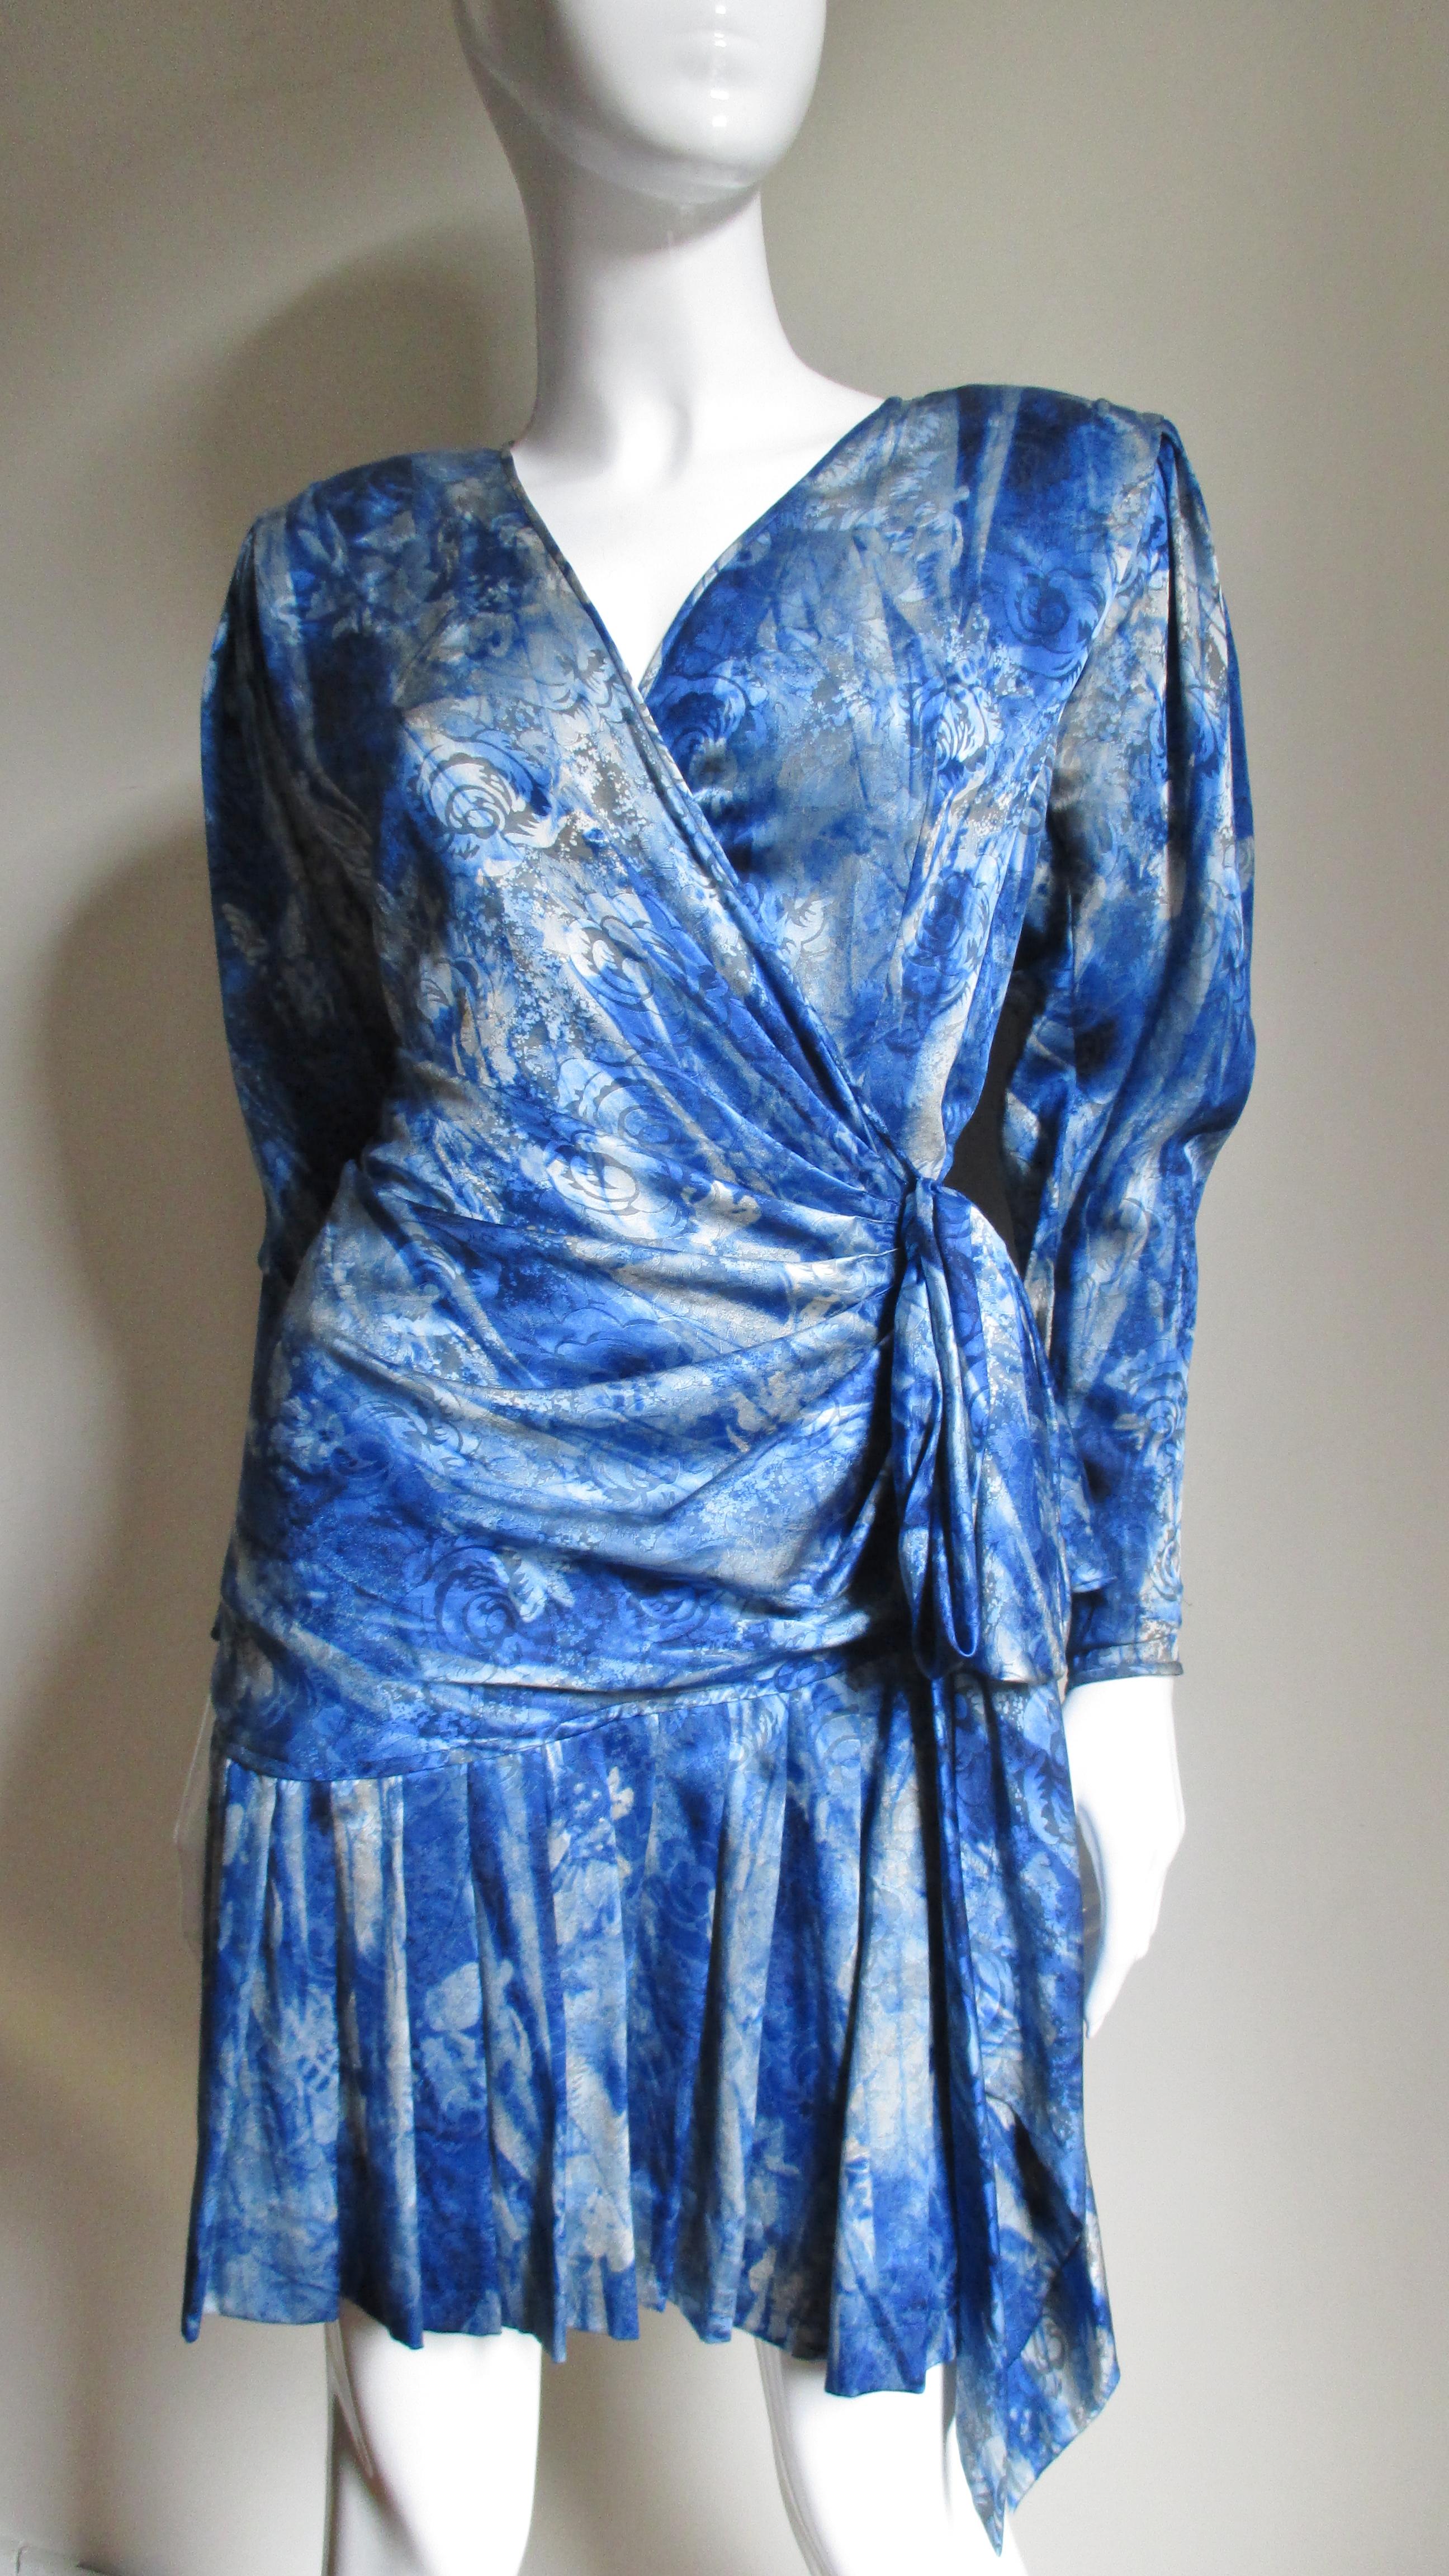 A gorgeous blue and off white elaborate abstract pattern silk damask wrap dress from Emanuel Ungaro Parallele.  It has a V neckline with a wrap semi fitted hip length bodice tying at the side waist.  The long sleeves have zipper cuff sleeves with